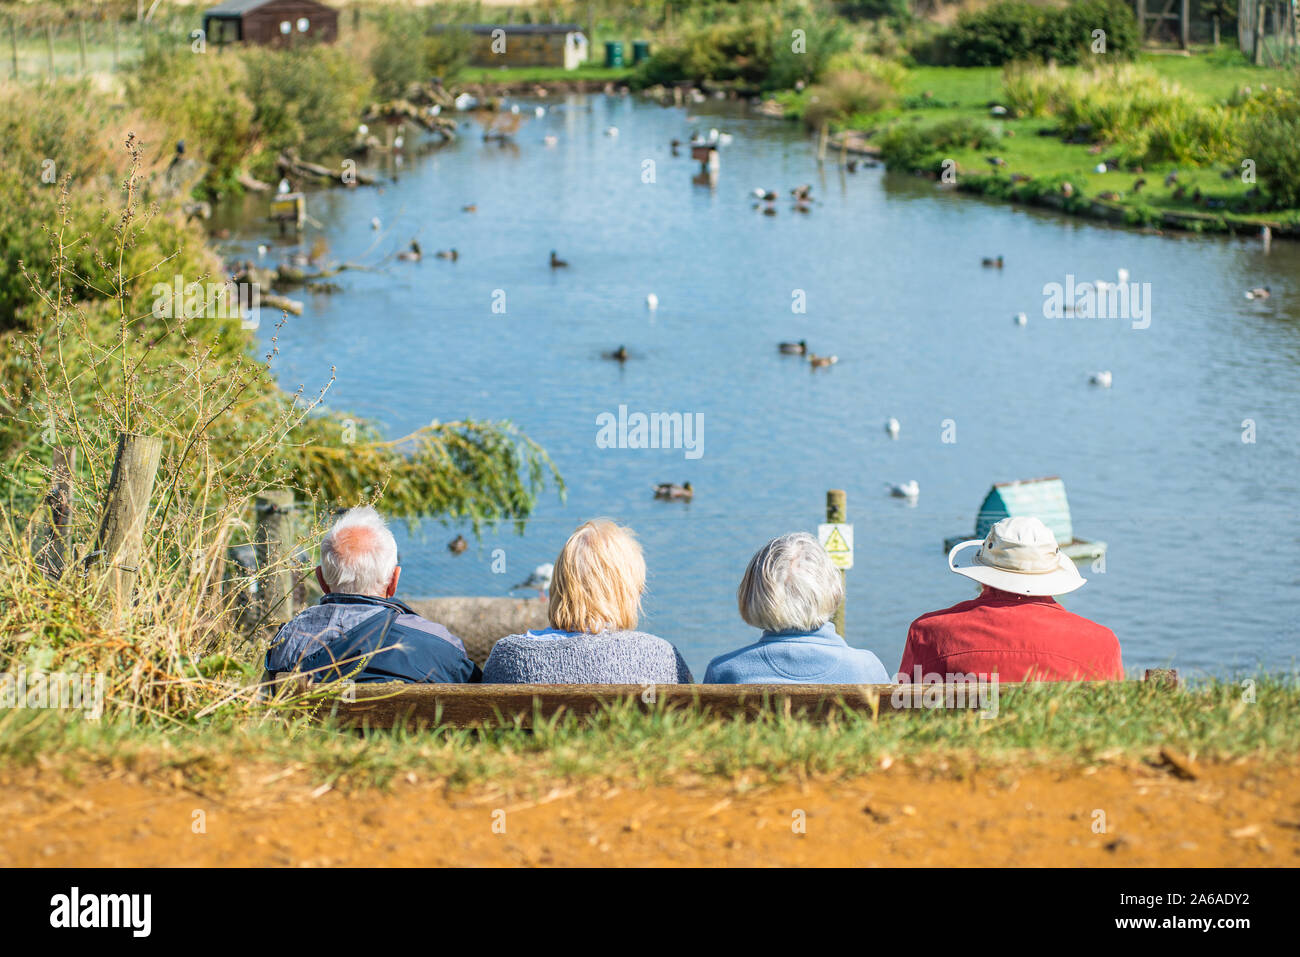 Elderly people enjoying the tranquility of Blakeney Conservation Duck Pond near the North Norfolk coast in East Anglia, England, UK. Stock Photo